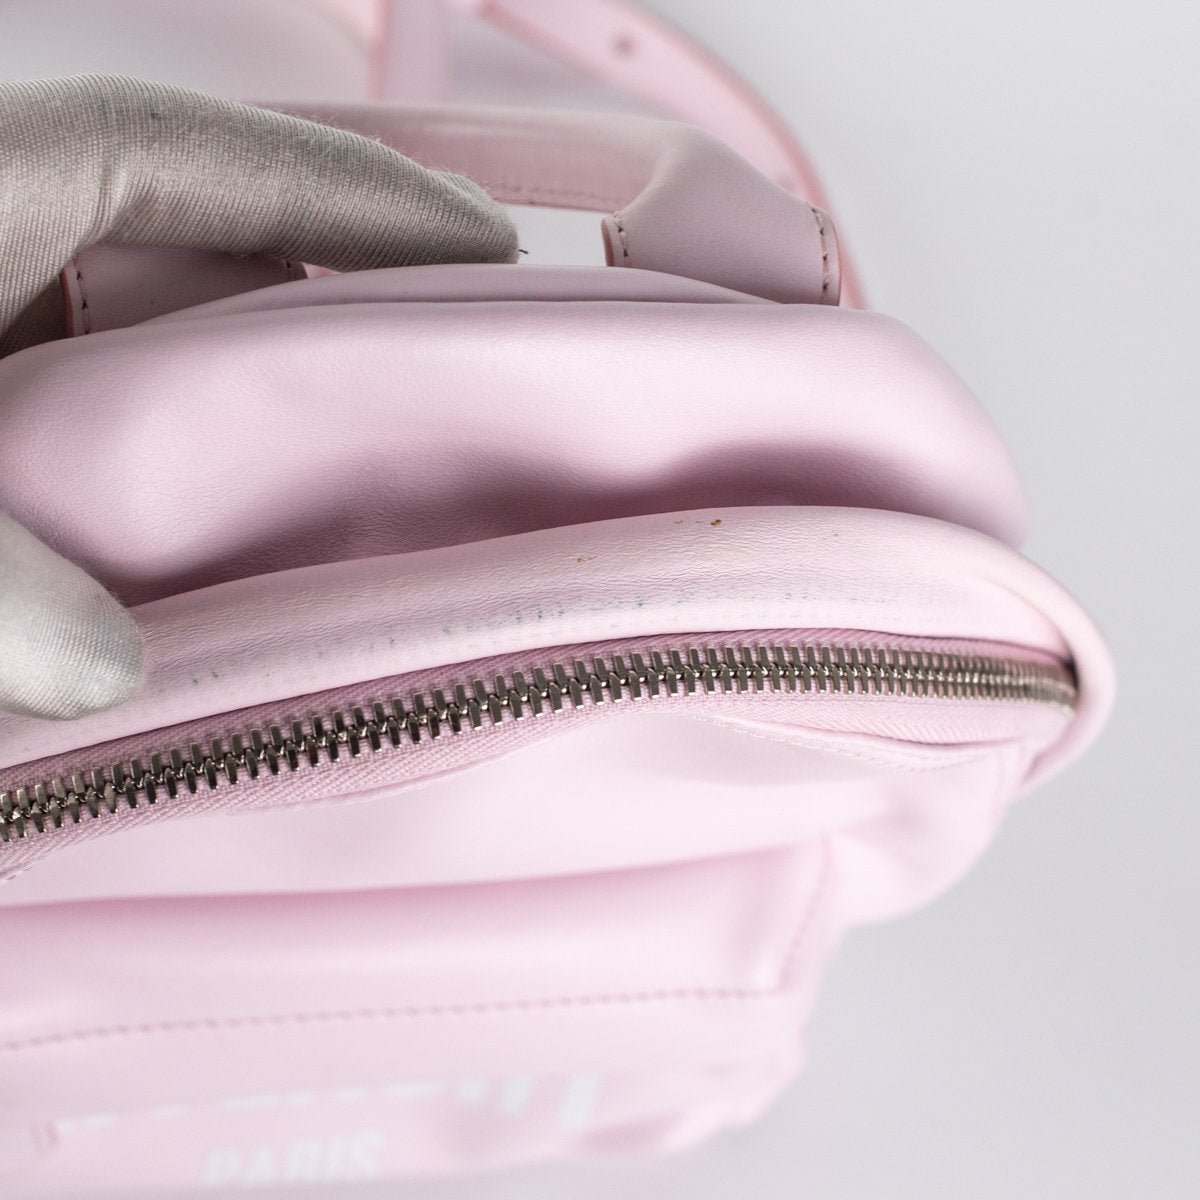 Givenchy Backpack Light Pink/Lavender - THE PURSE AFFAIR